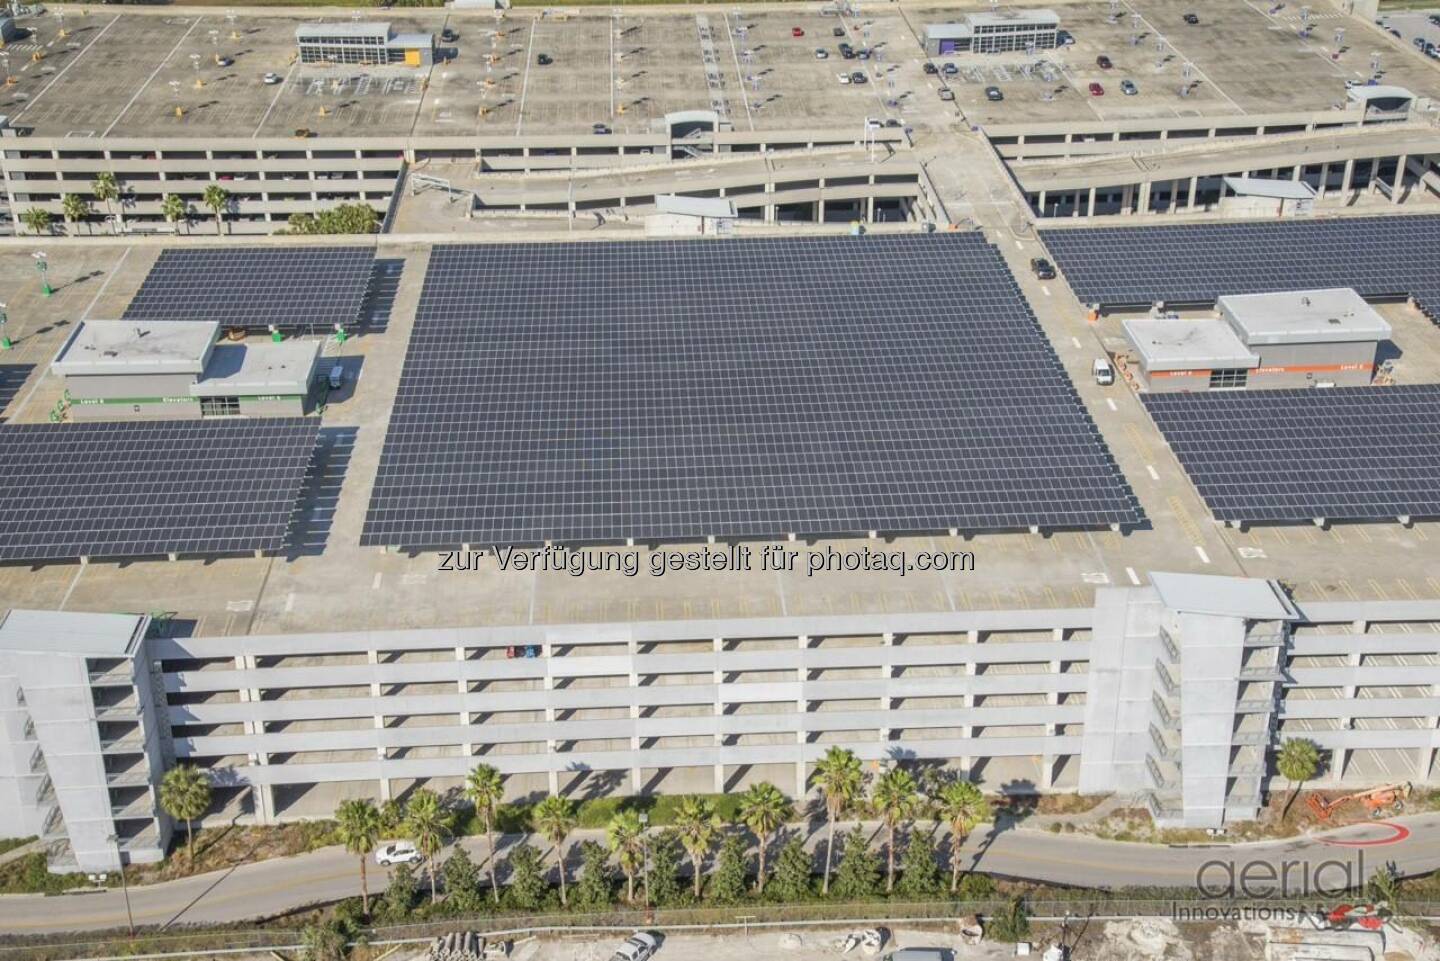 Tampa International Airport unveiled a two-megawatt #solar canopy system consisting of over 6K SolarWorld solar panels. Great job by our partner Solar Source installing the project. Today marks a HUGE day for solar! We are proud to announce the unveiling of the brand new 2 MegaWatt solar canopy system at Tampa International Airport atop the economy parking lot! This system consists of over 6,000 solar panels and is Florida's largest solar canopy system to date.

We are beyond grateful to be the company chosen to piece this project together. It is a huge milestone for our company and an even bigger stepping stone towards a greener Florida! Here are a few highlights from the  Source: http://facebook.com/SolarWorldUSA